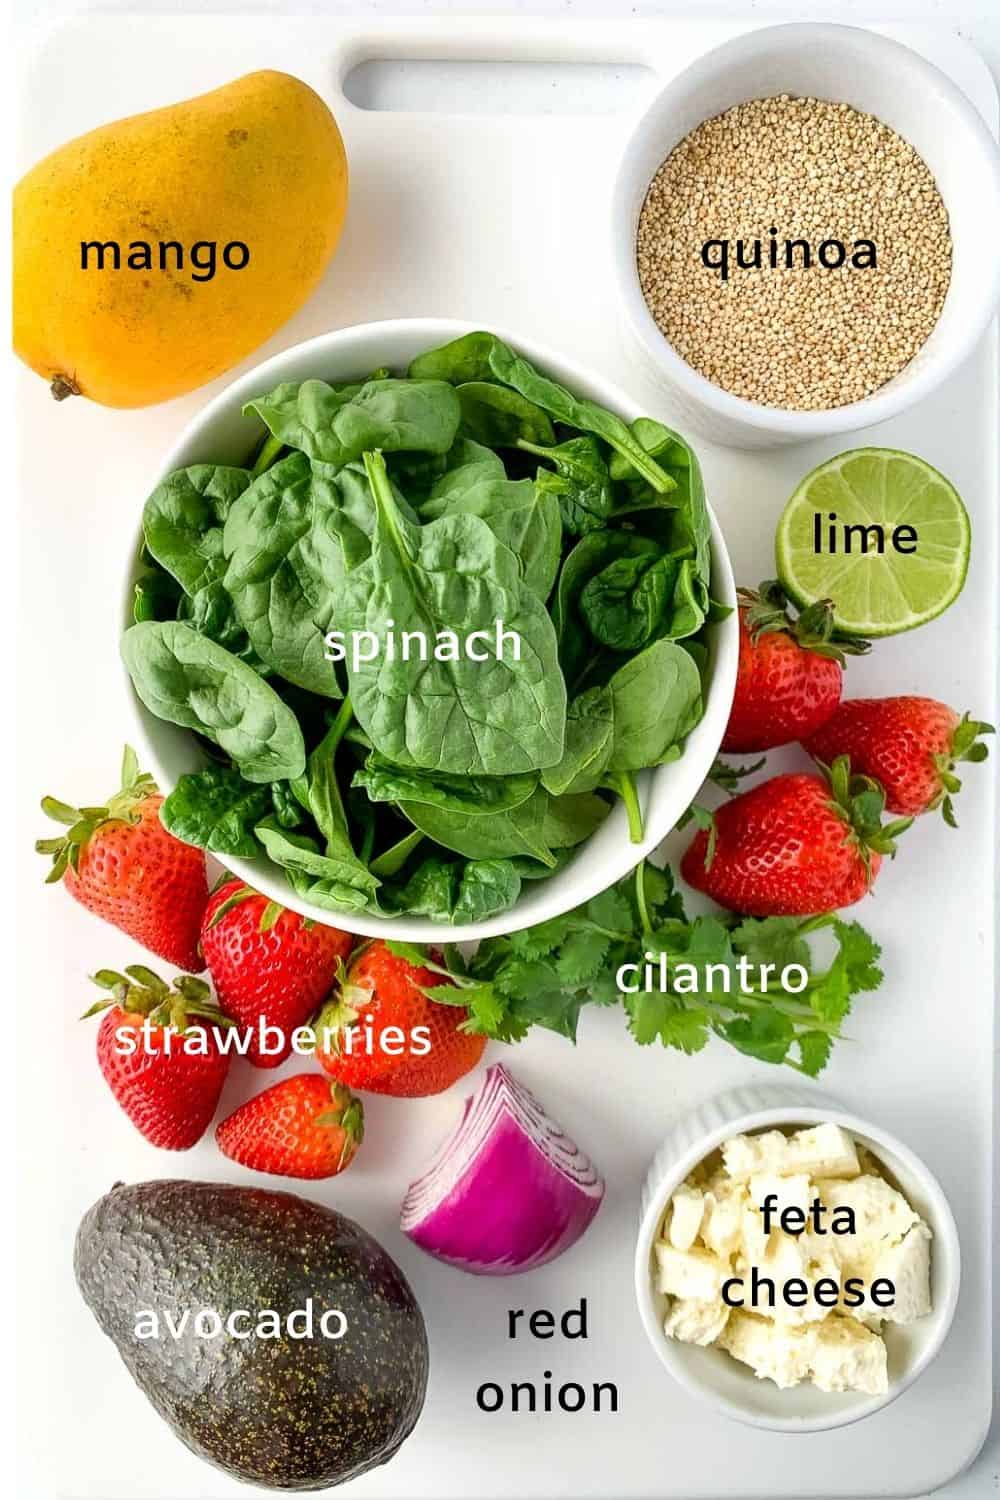 Labelled ingredients for quinoa bowl with spinach, feta, strawberries and mango.